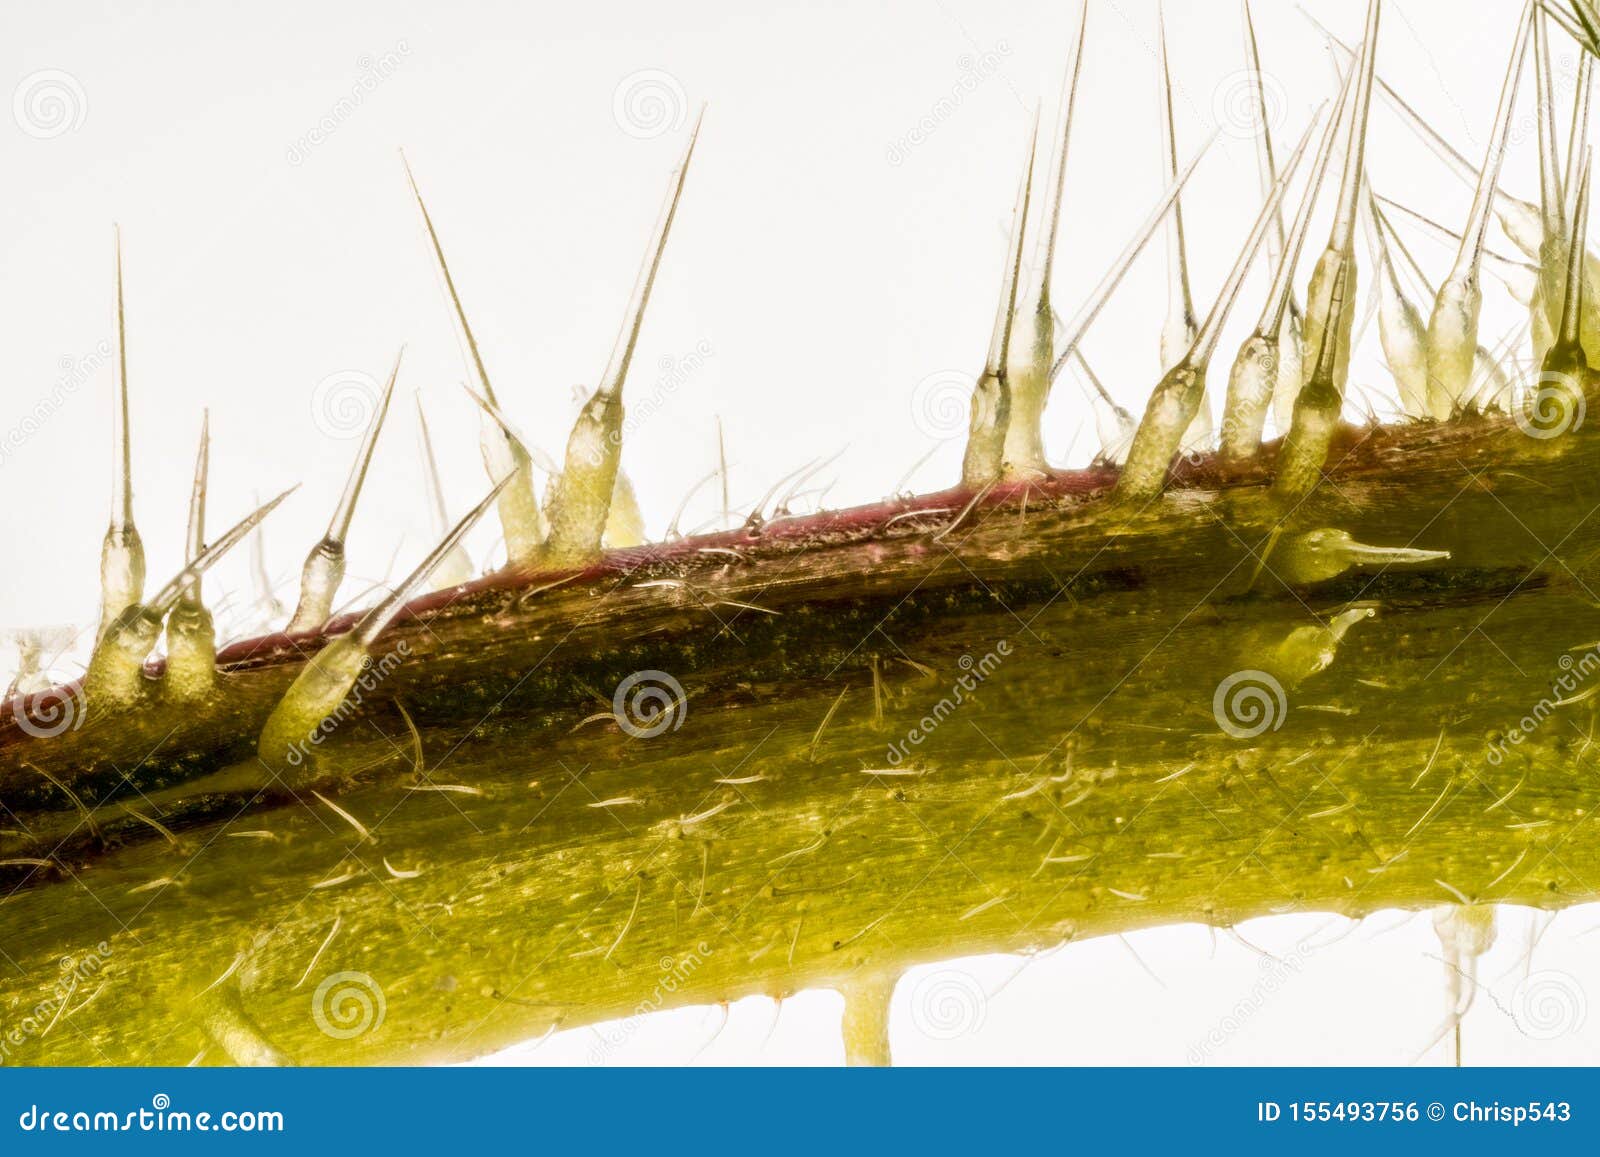 extreme close up of of stinging nettle stemurtica dioica